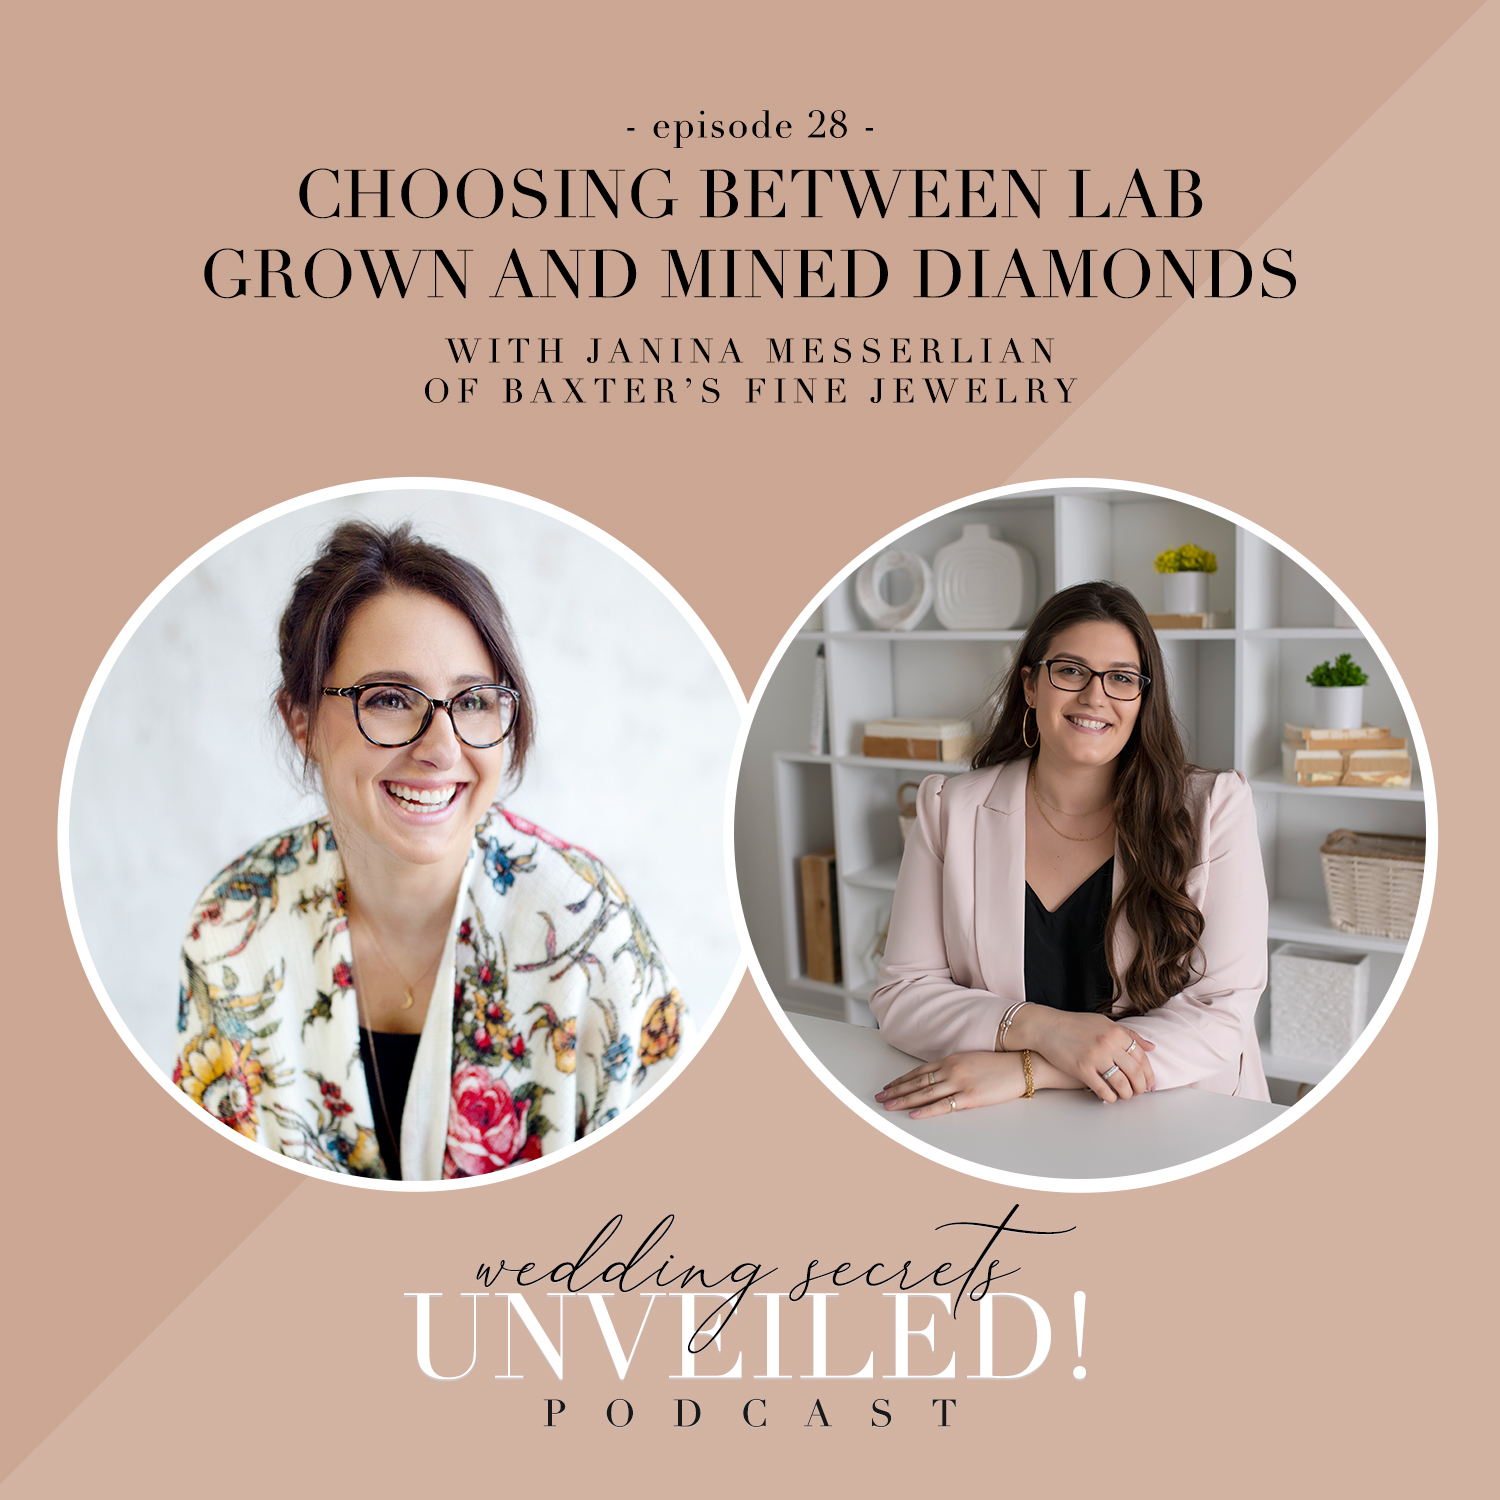 Lab Grown and Mined Diamonds: How to Choose for Your Jewelry, tips from Janina Messerlian of Baxter’s Fine Jewelry